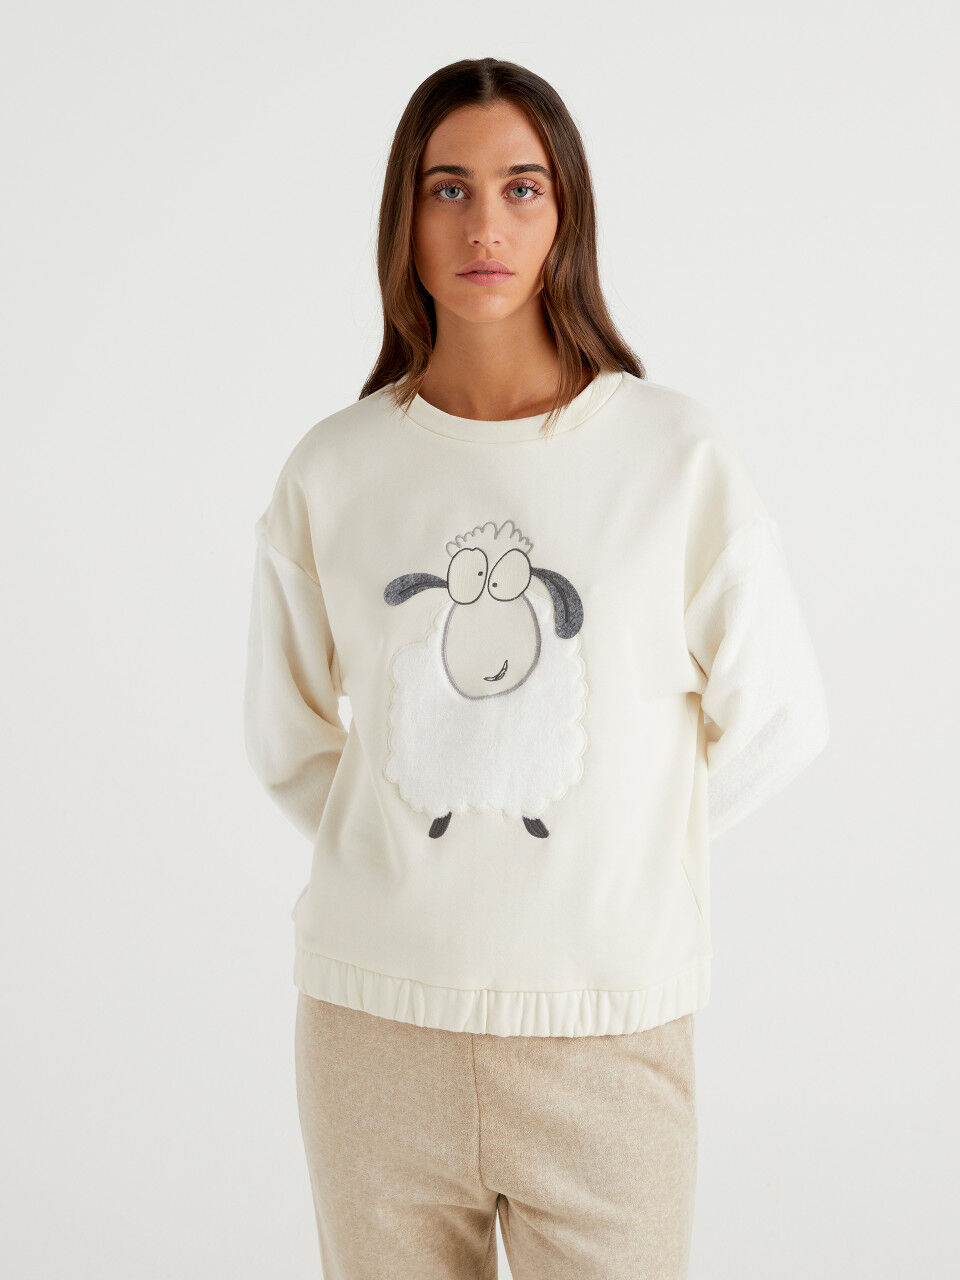 Sheep sweater with fur sleeves